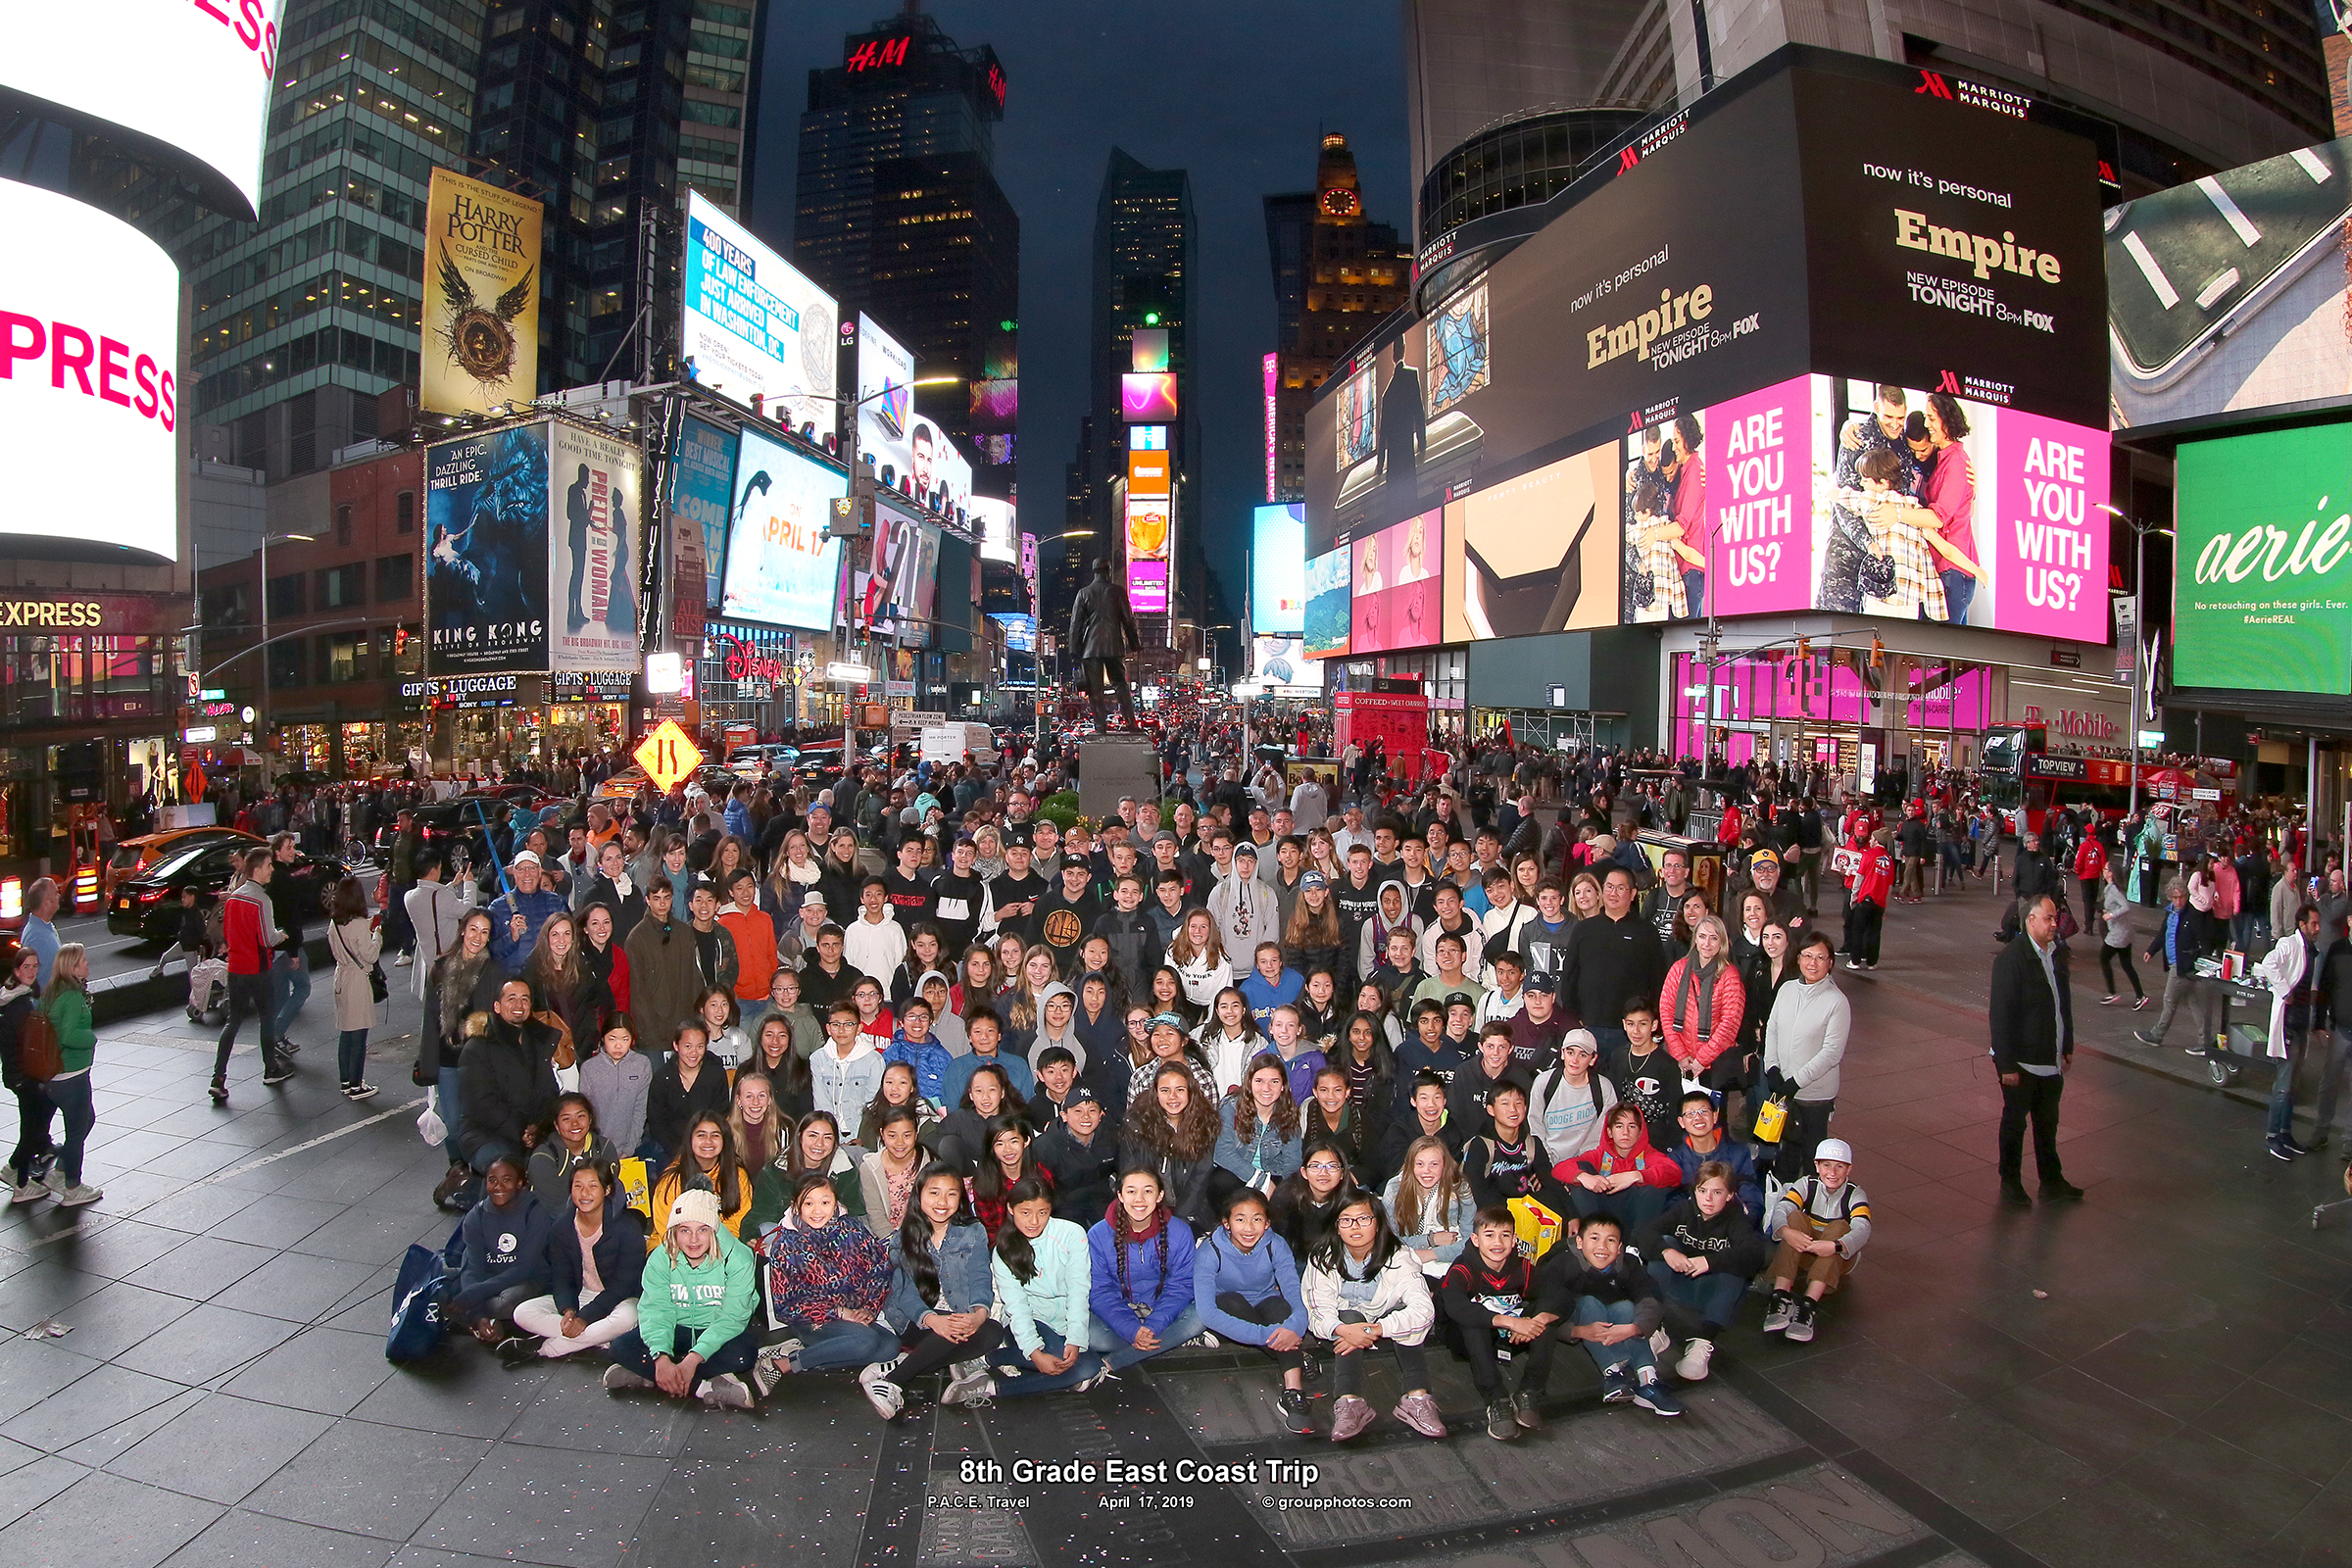 Group of students posing for an image at Times Square in New York City